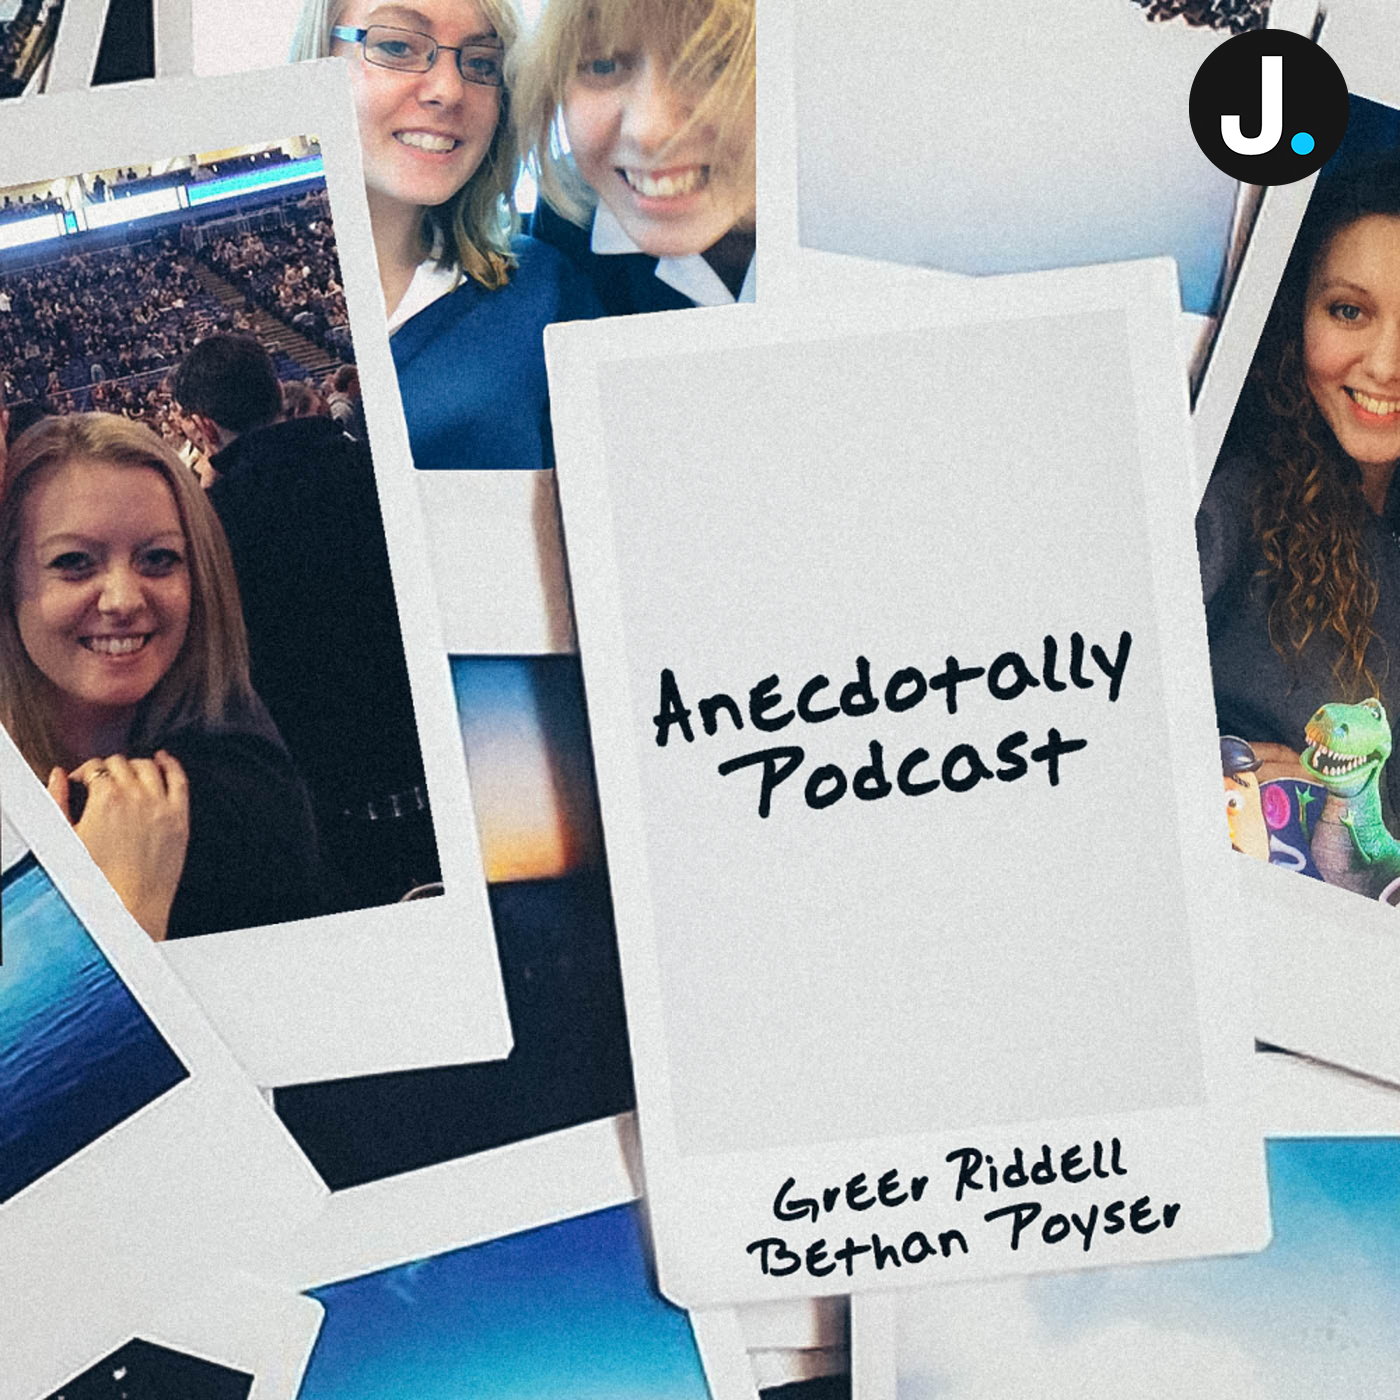 Anecdotally Podcast - Anecdotally Podcast with Dr. Bethan Poyser and Greer Riddell